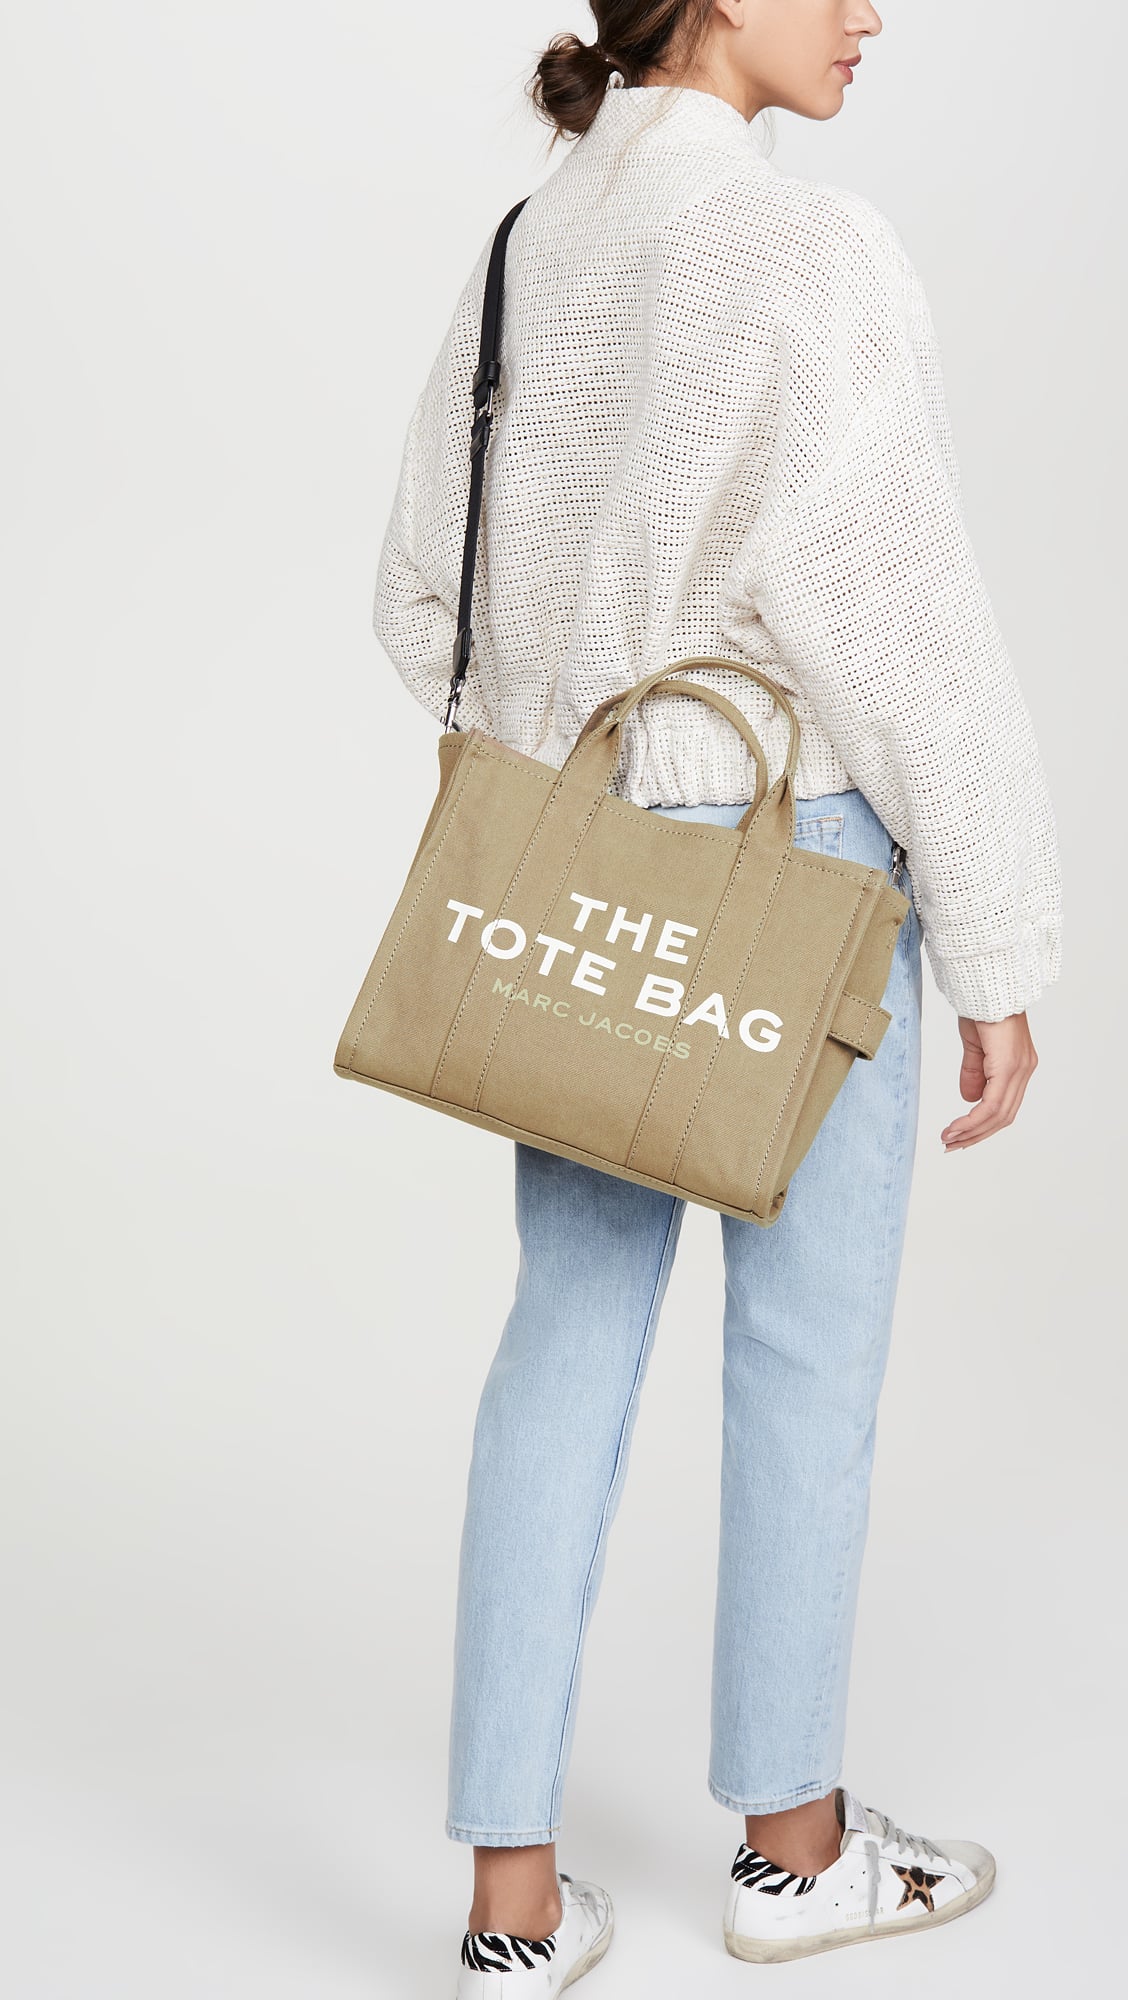 Marc Jacobs Tote Bag: Effortlessly Chic and Versatile - Fashion